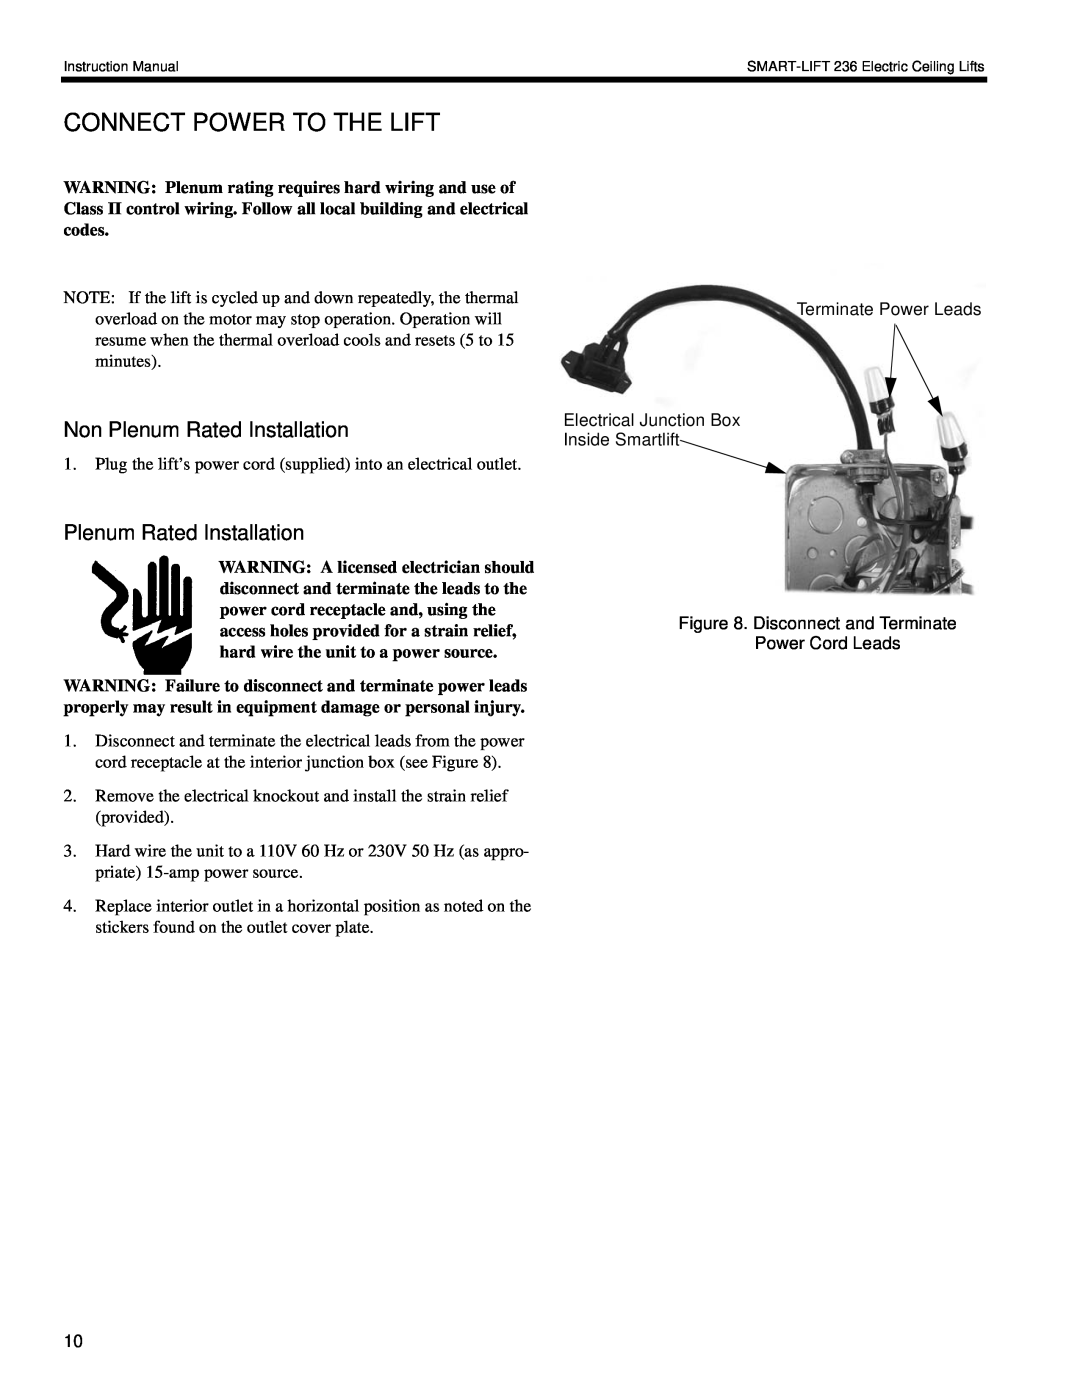 Chief Manufacturing SL-236 installation instructions Connect Power To The Lift, Non Plenum Rated Installation 